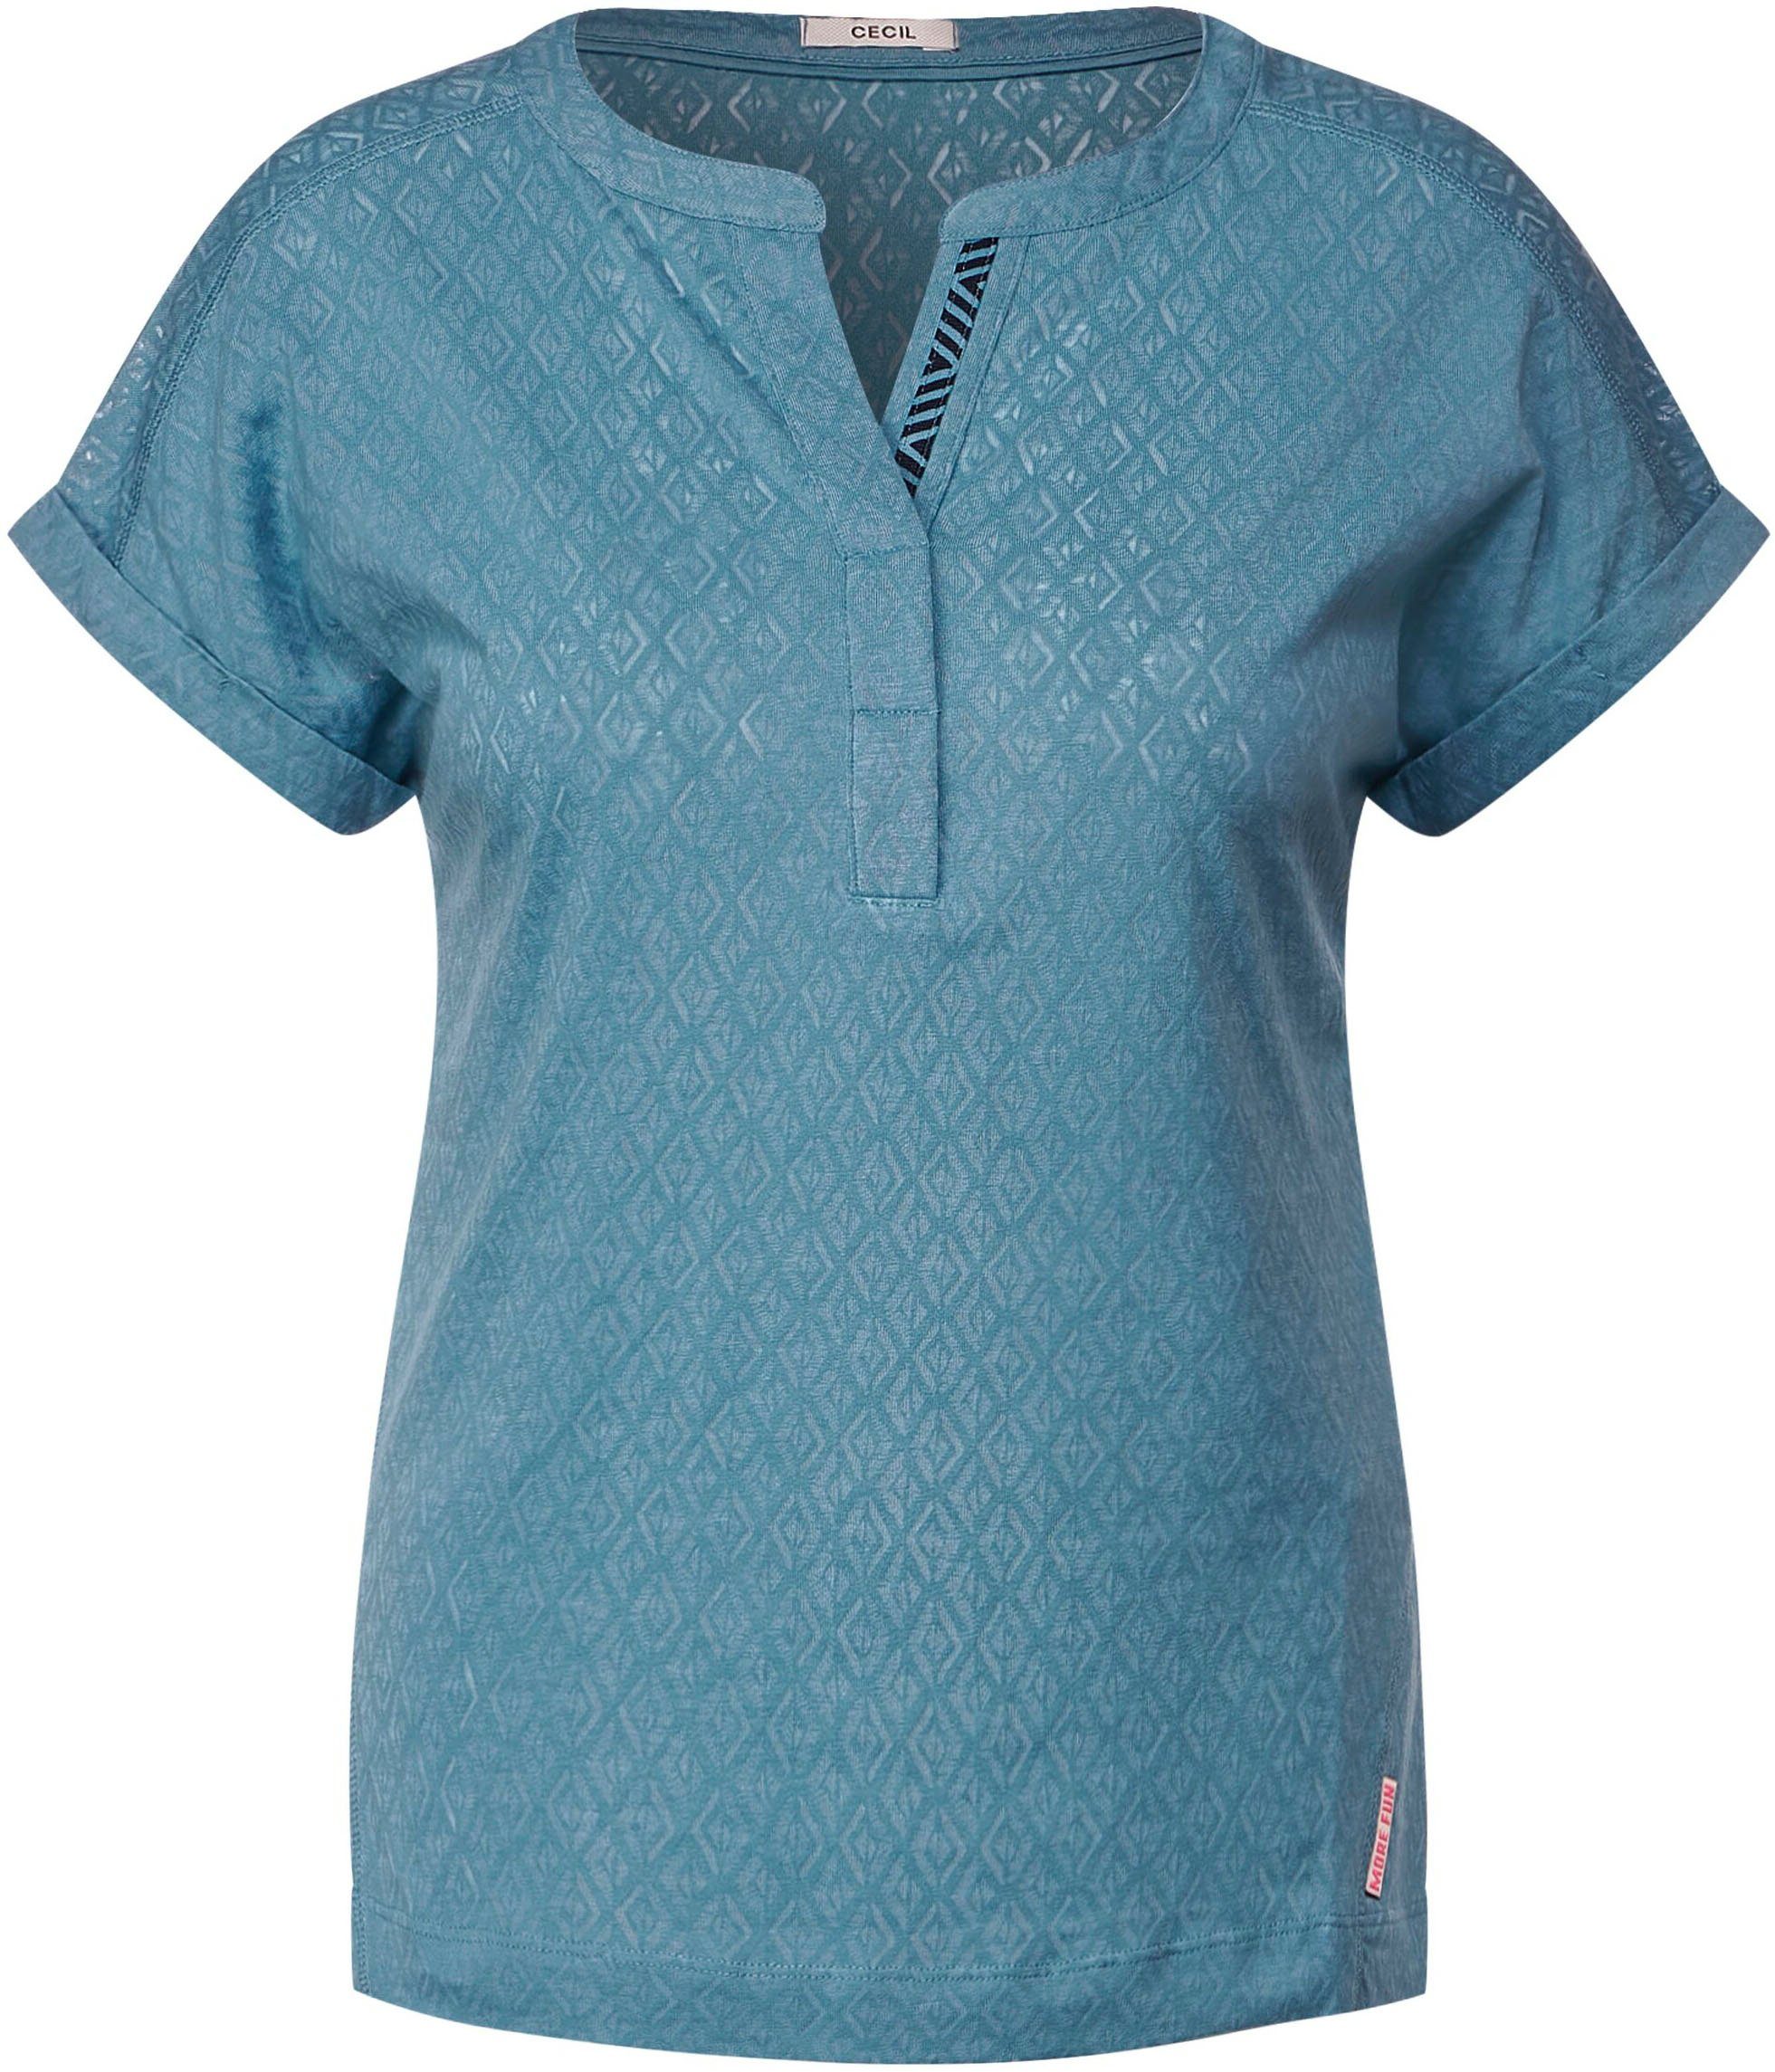 Allover-Muster in adriatic Cecil blue mit Rhombusform T-Shirt